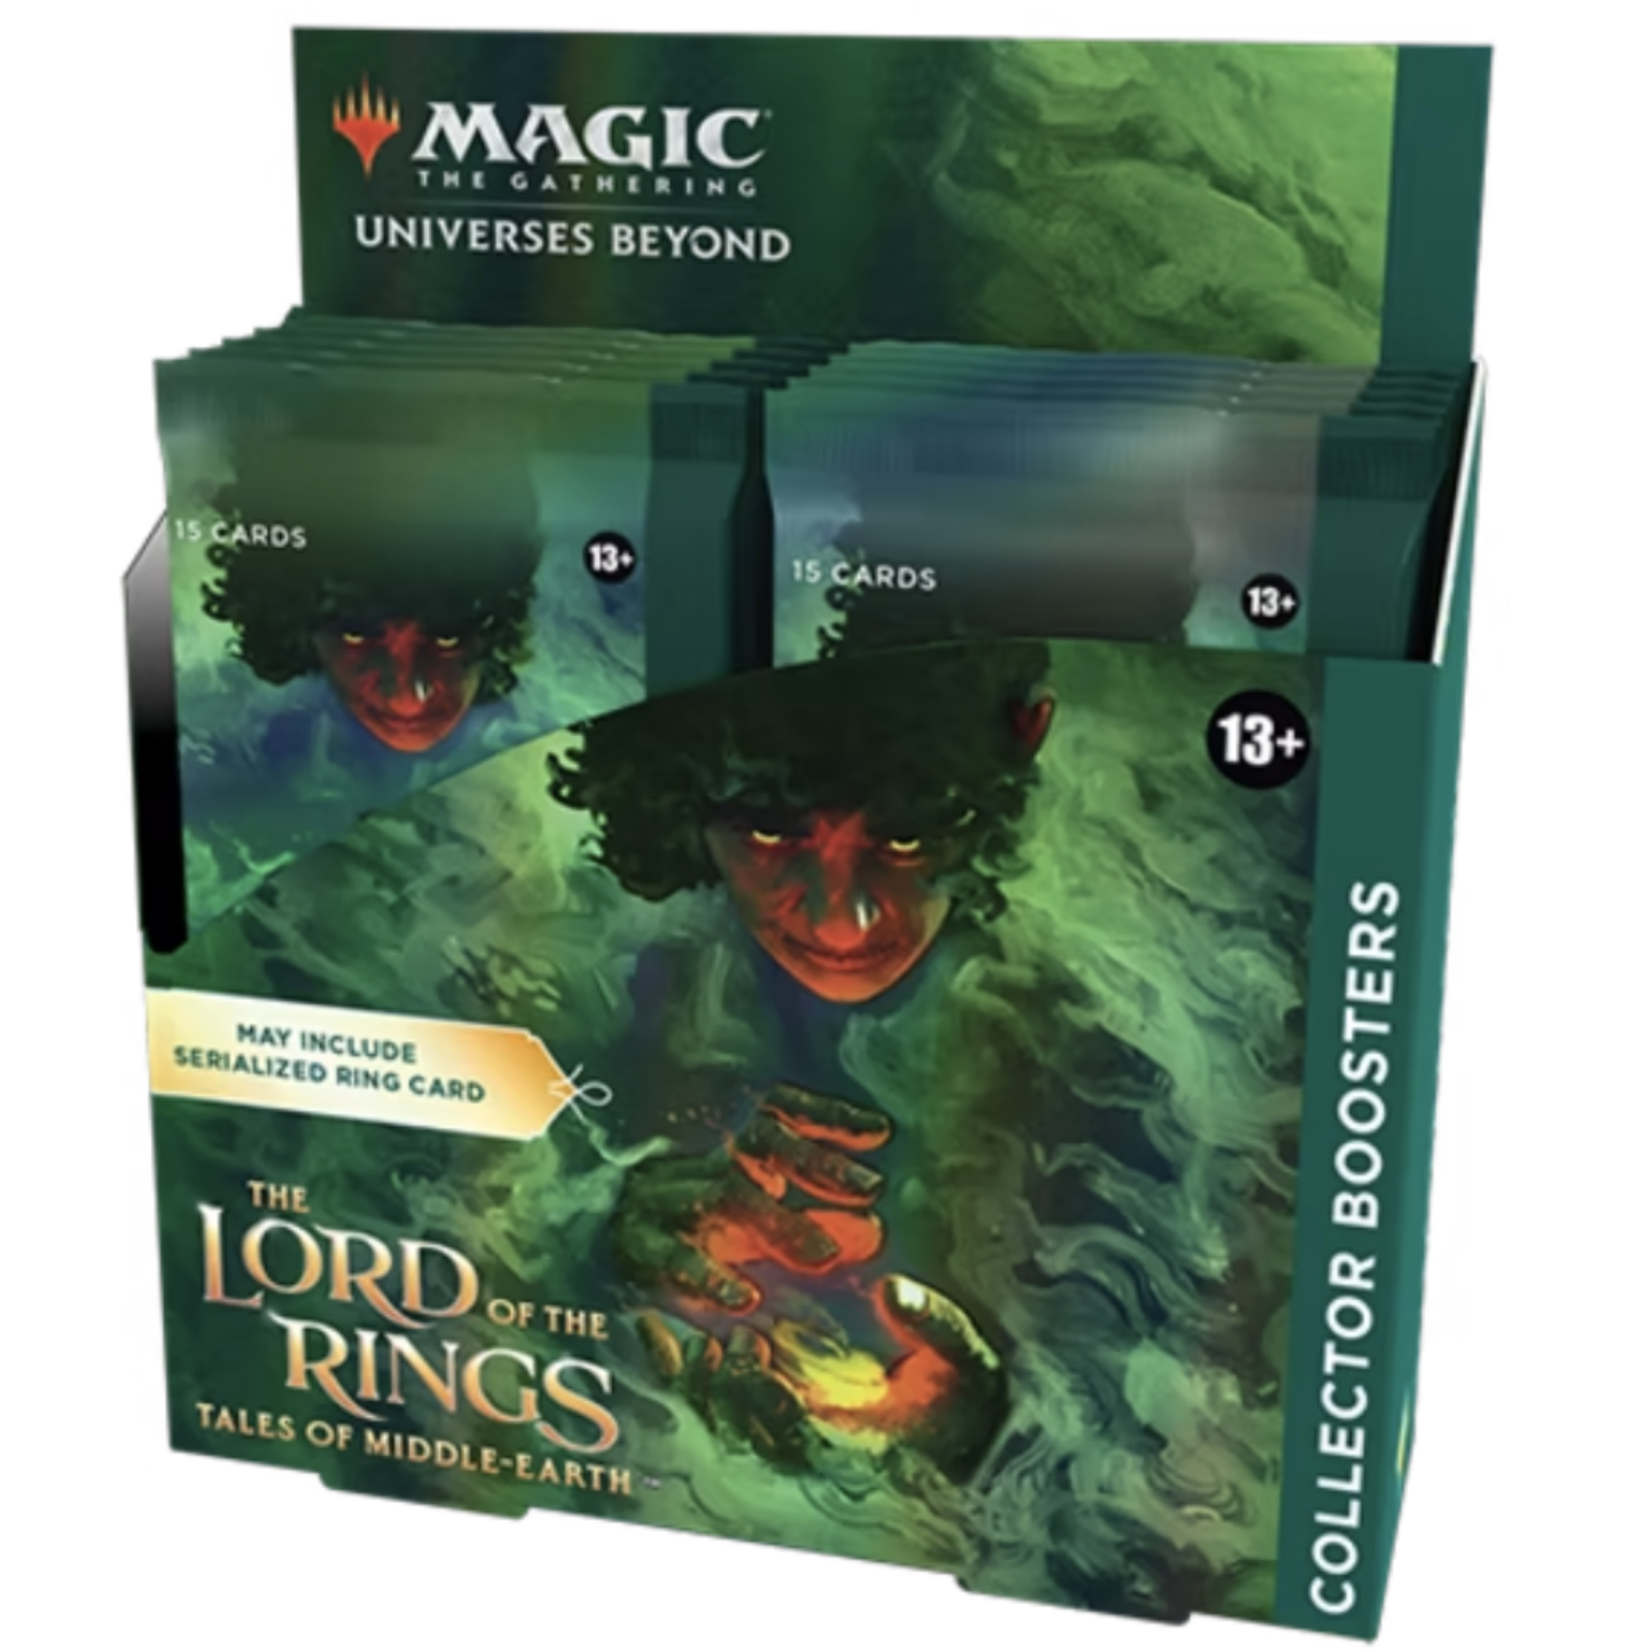 The Lord of the Rings Tales of Middle-earth Collector Booster Box